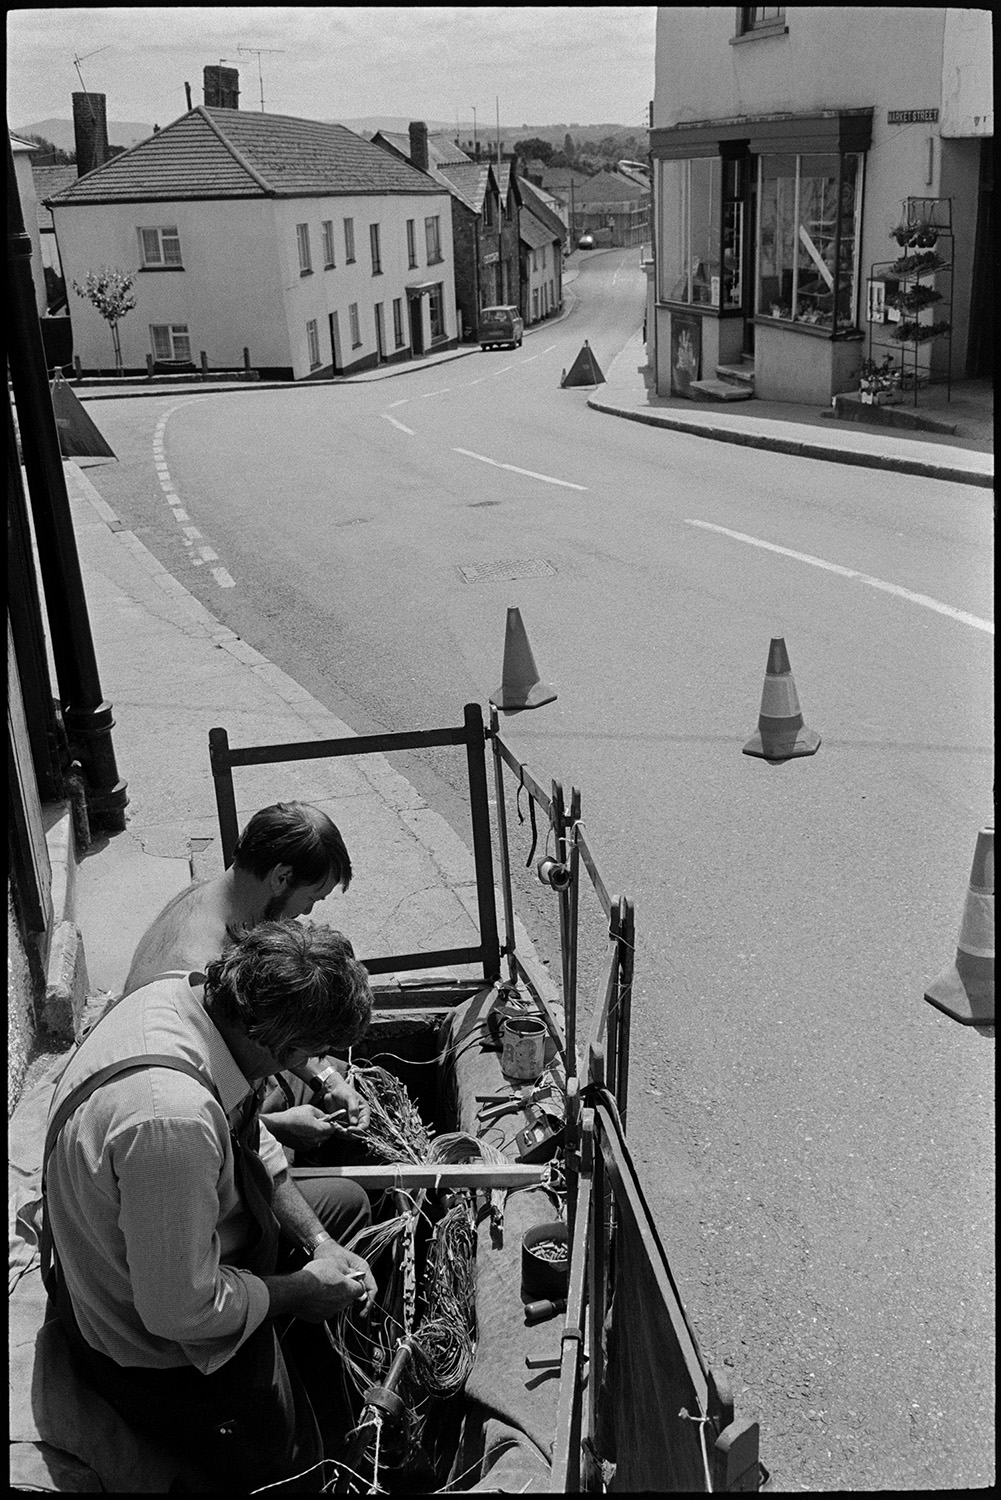 Electrical engineers working in pavement manhole in street.
[Engineers working on wires in open manholes in the pavement on Market Street in Hatherleigh. A shop front can be seen further down the street and traffic cones are in the road.]